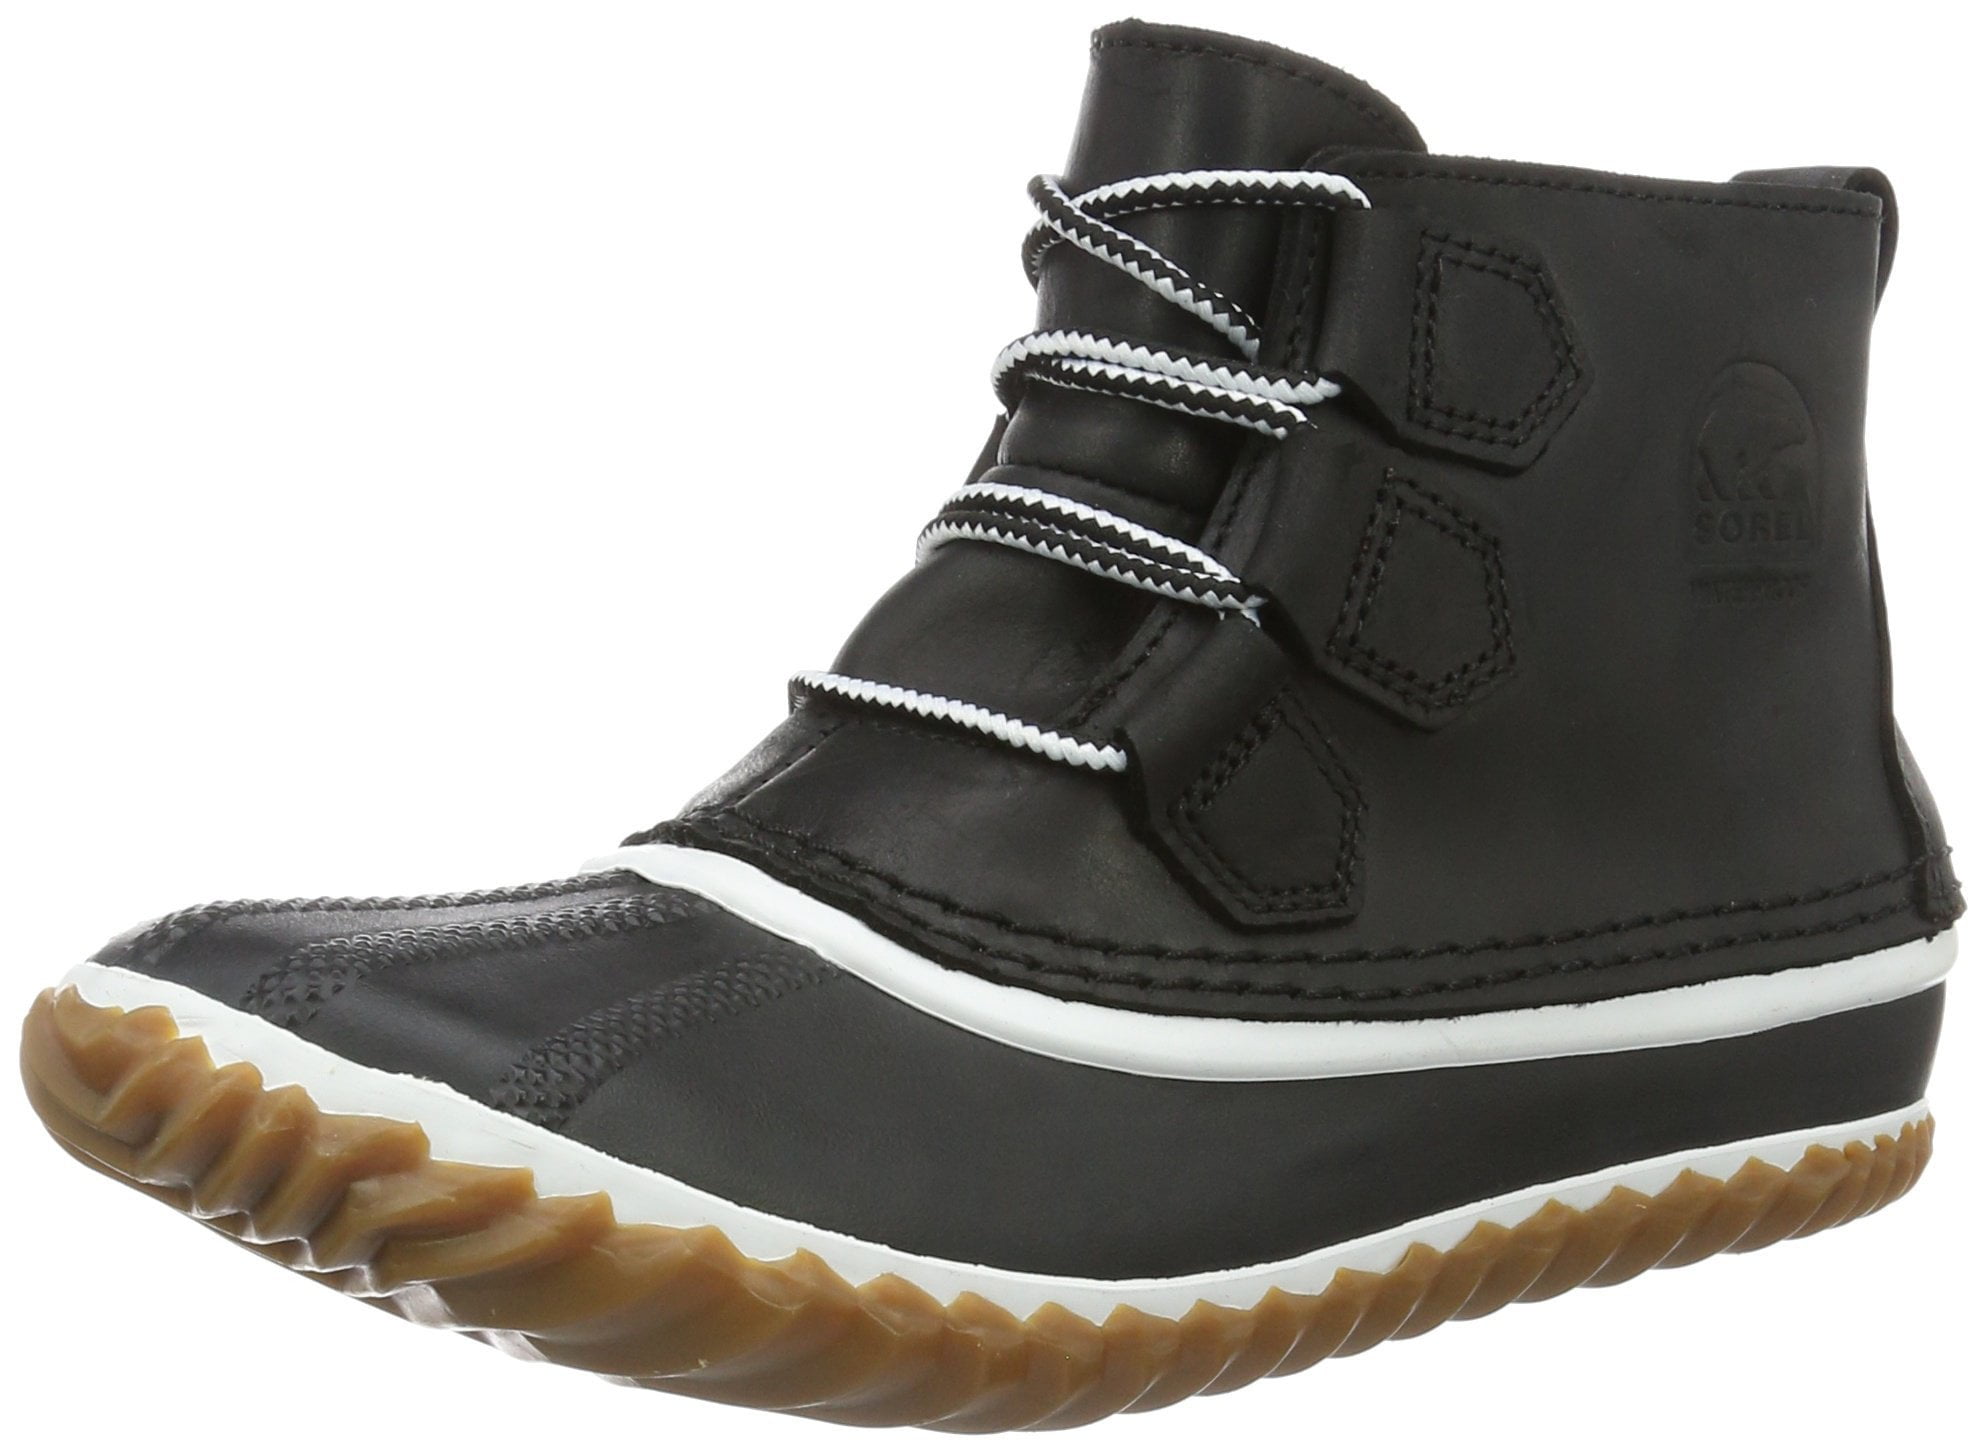 sorel women's out n about leather snow boot